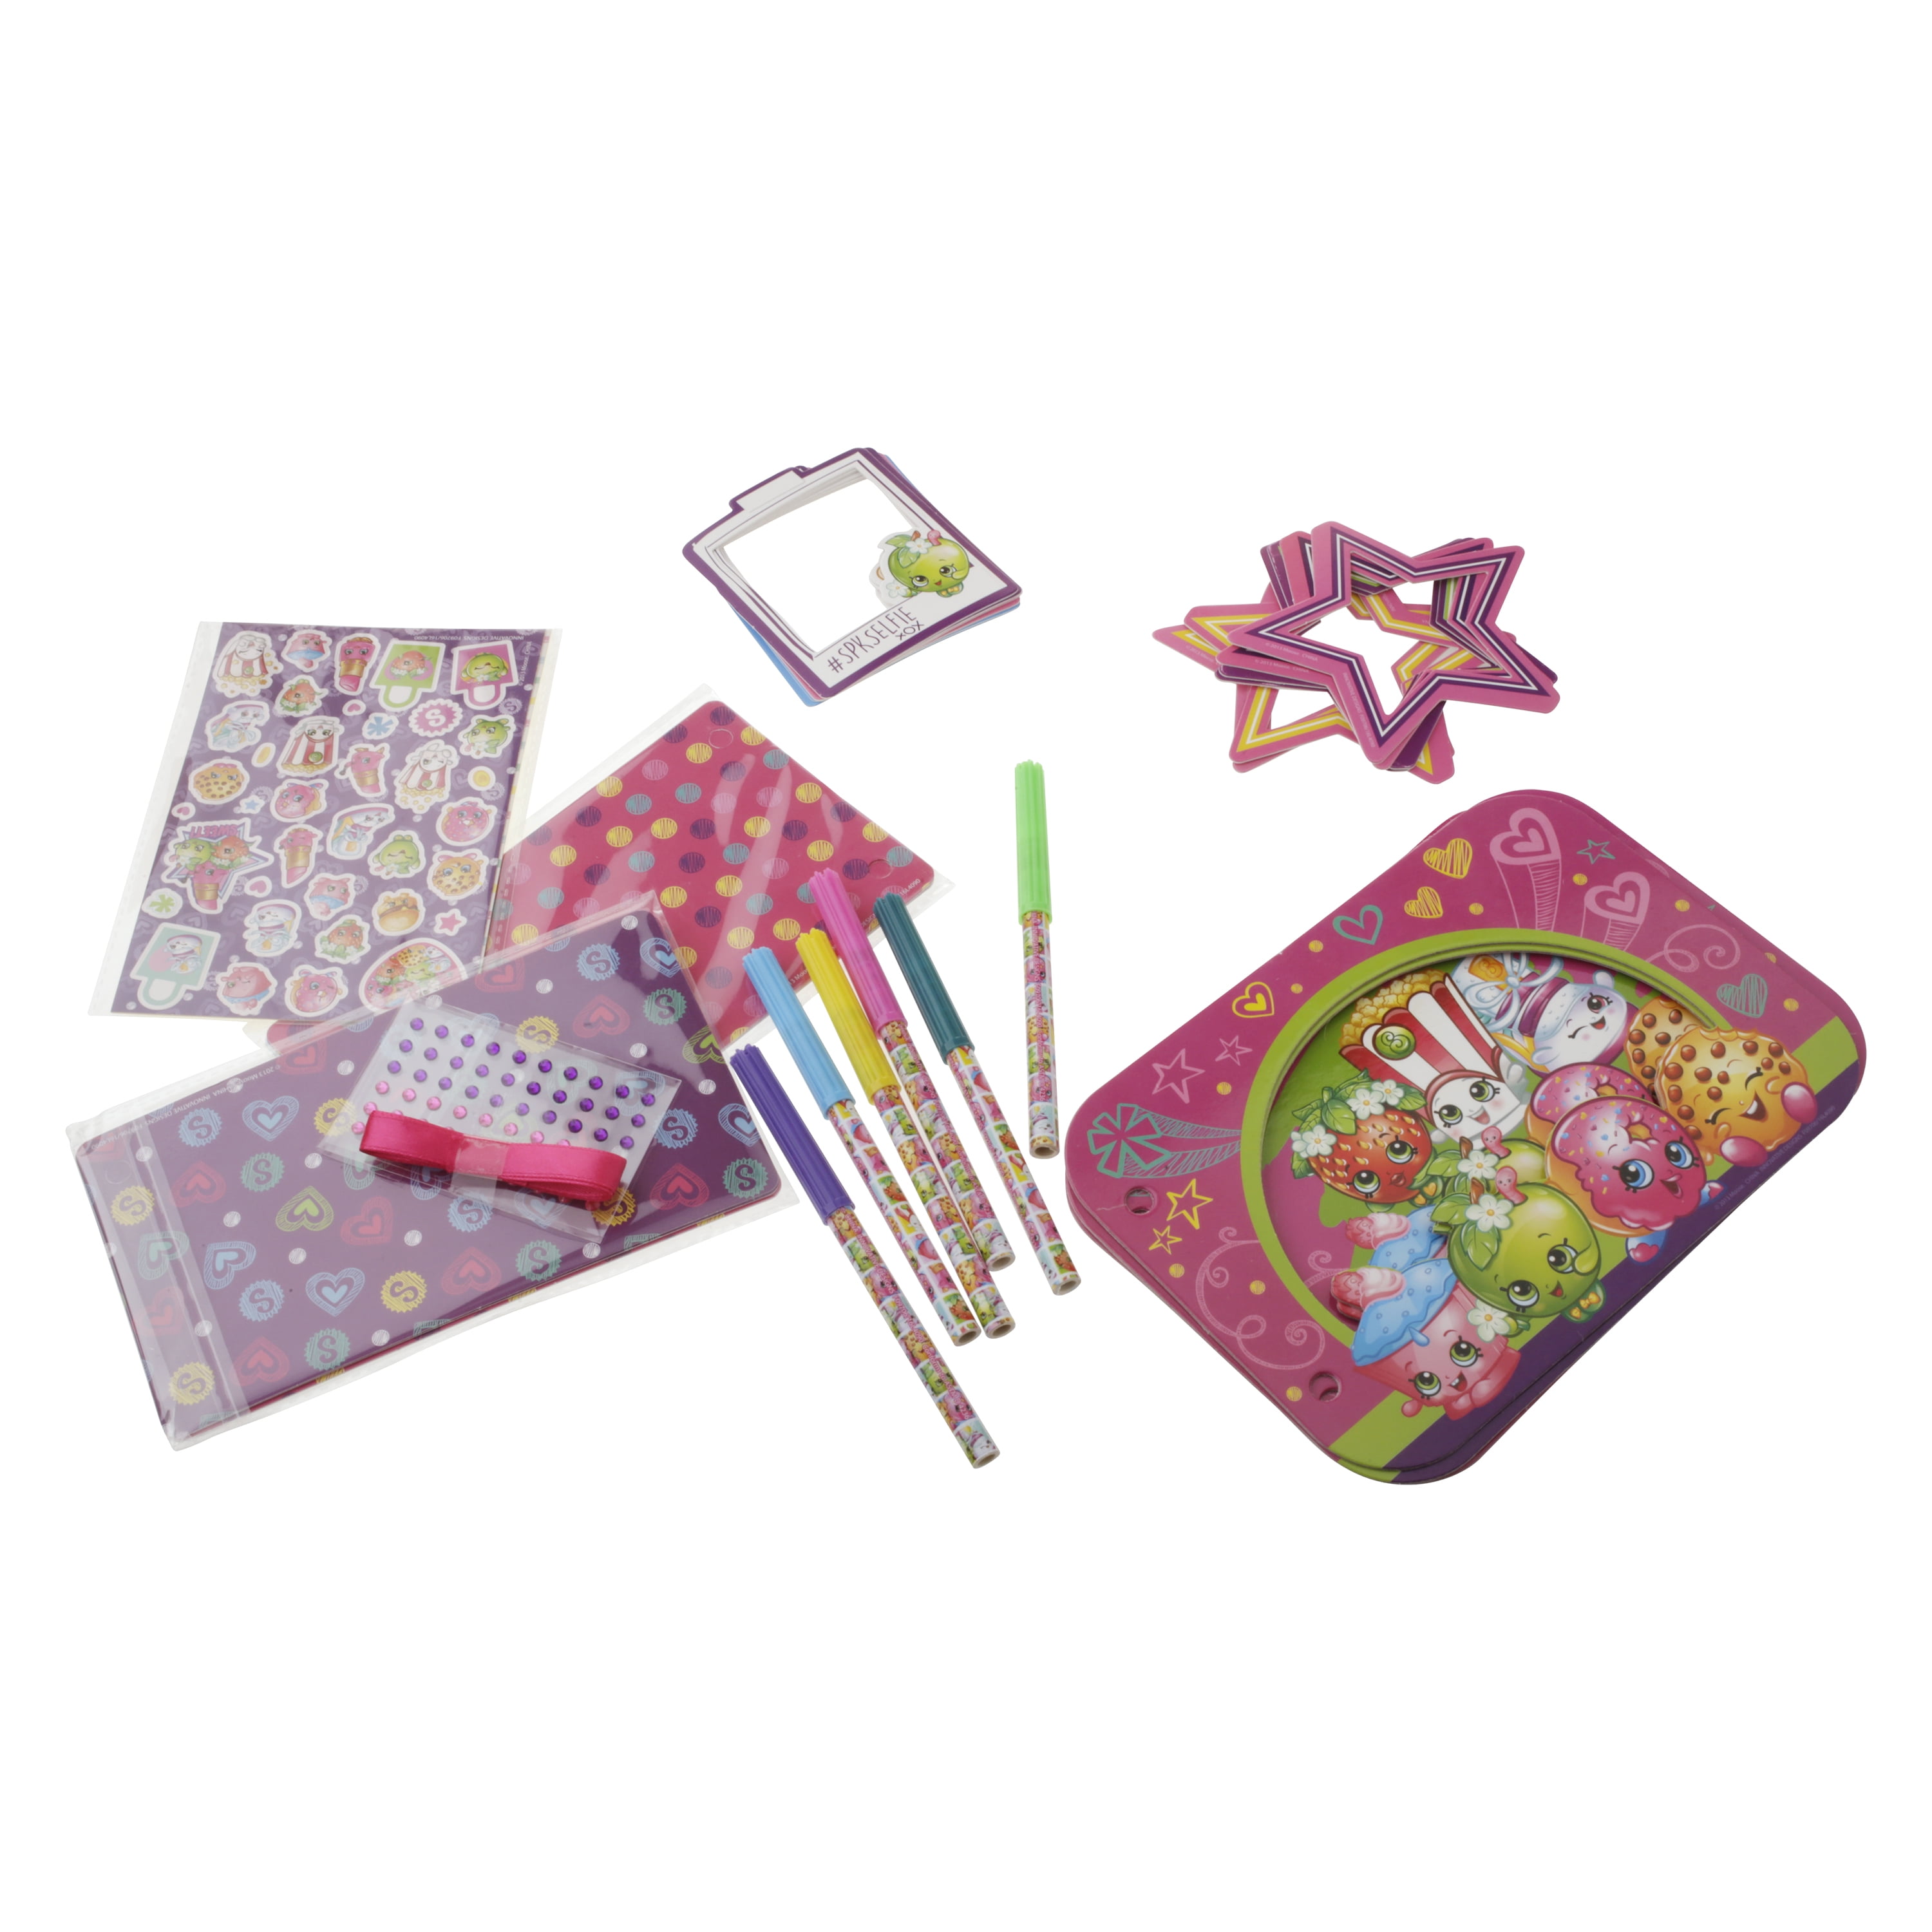 Shopkins Scrapbook Craft Set With Stickers Markers Ribbons Gems